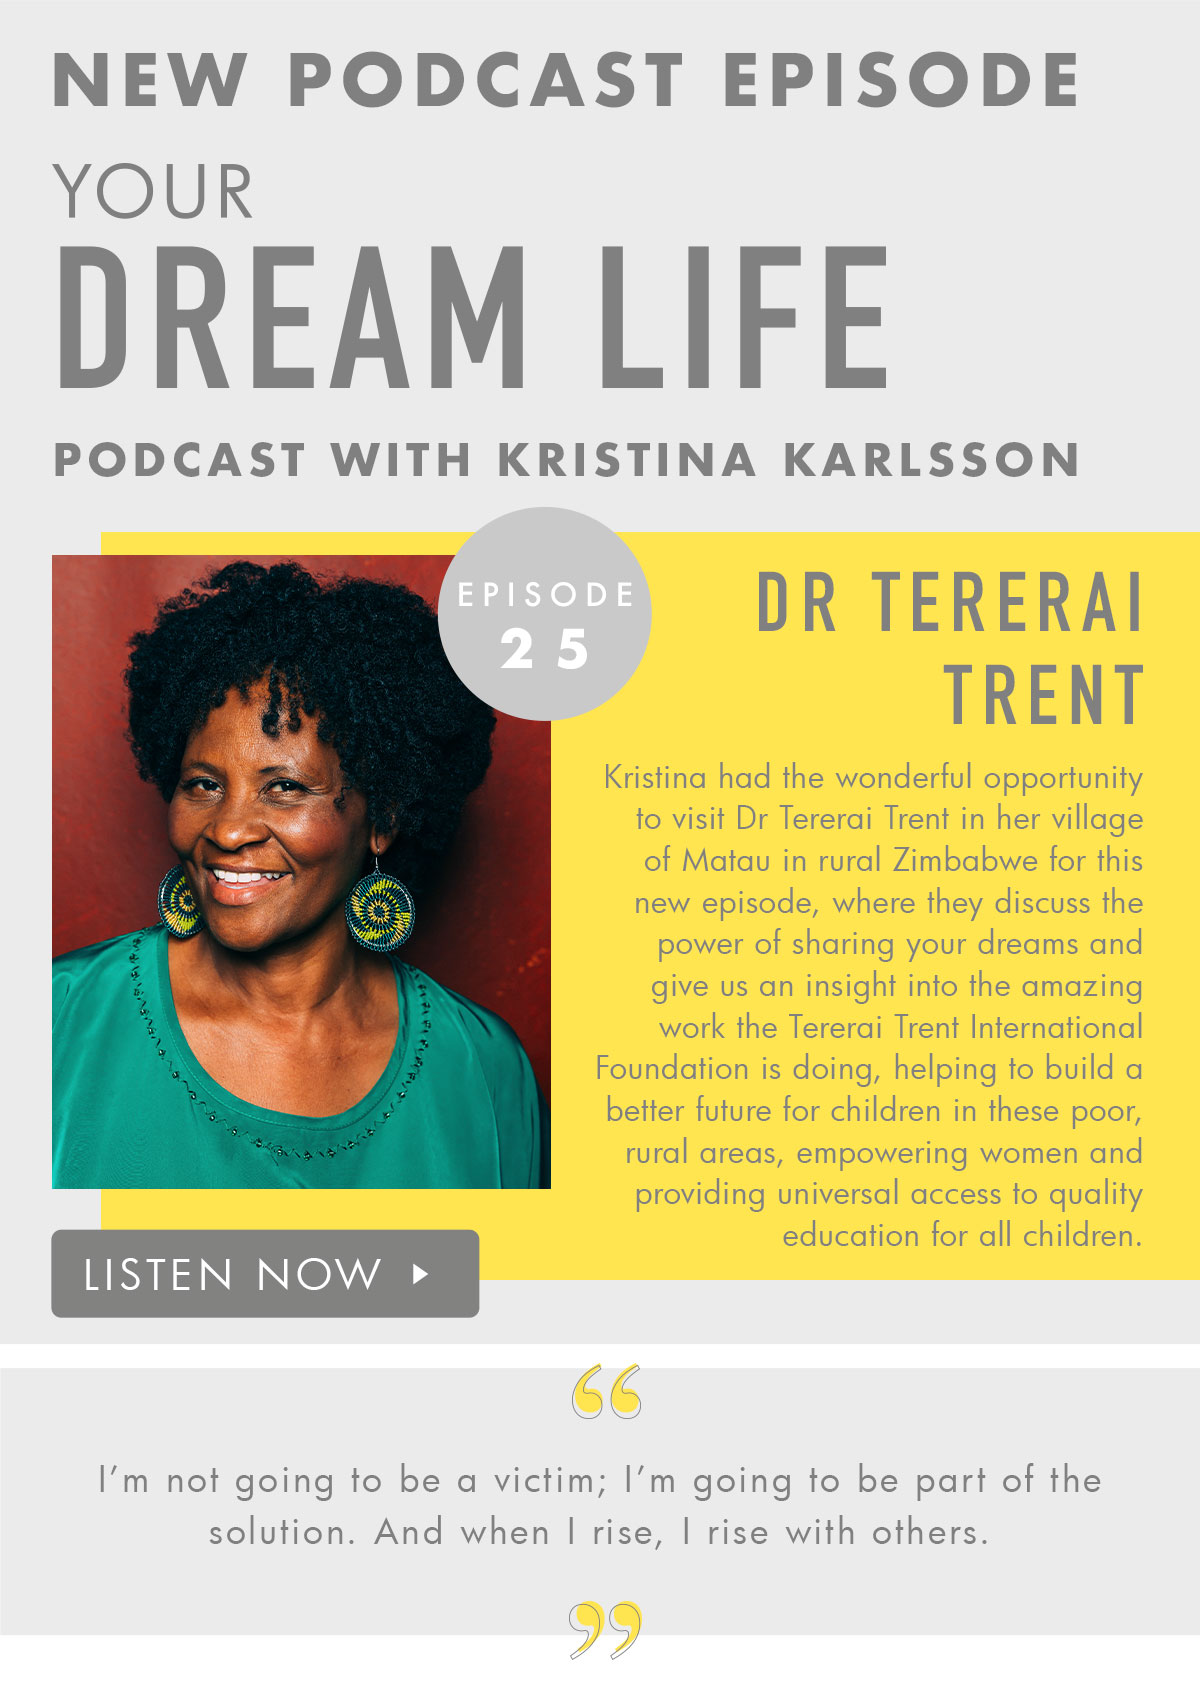 Your Dream Life Podcast New Episode! Listen now. 